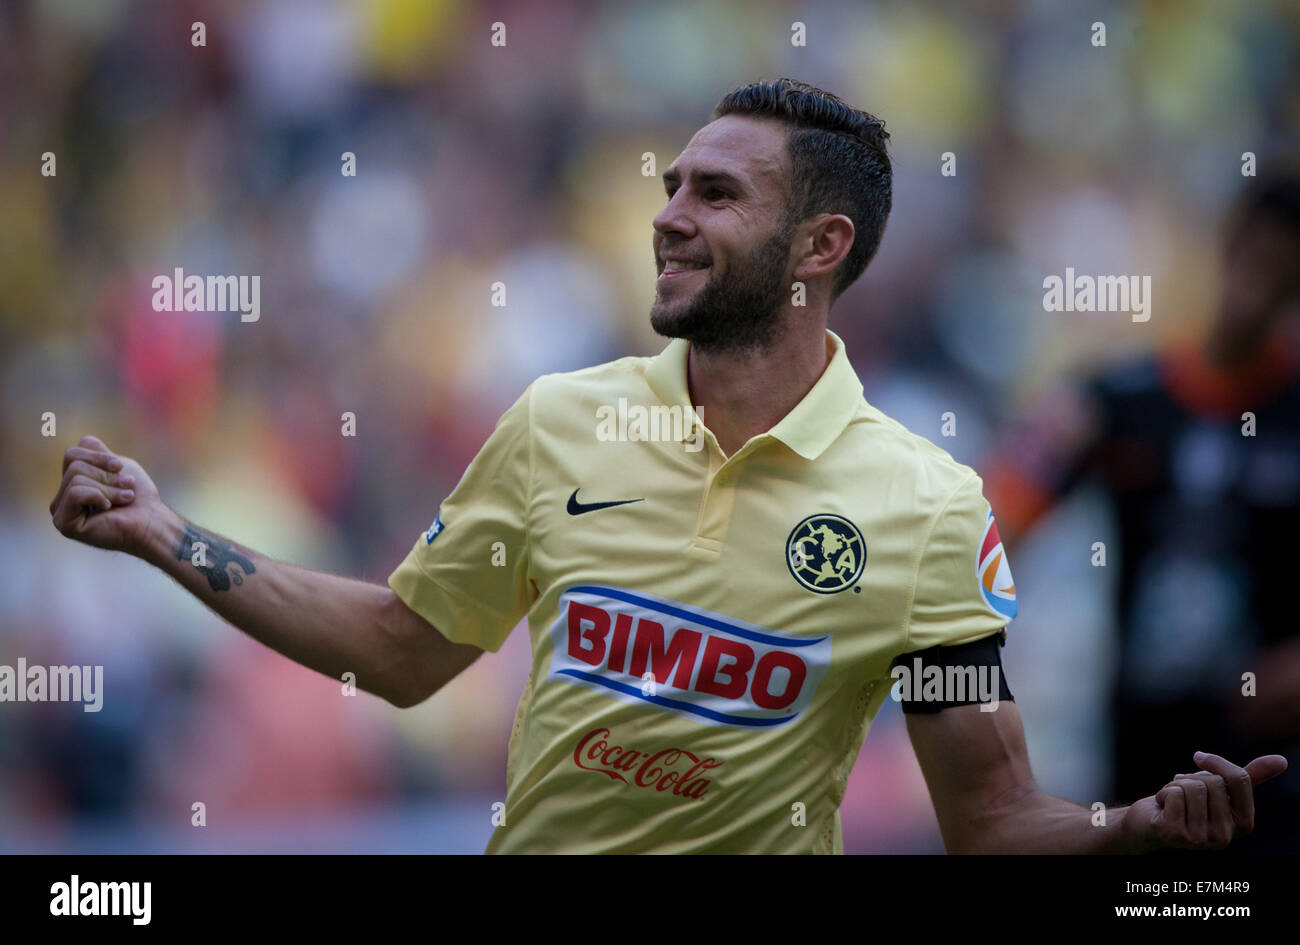 Mexico City, Mexico. 20th Sep, 2014. Miguel Layun of America celebrates after scoring during the Liga MX soccer match of the Opening Tournament 2014, against Pachuca, held at Azteca Stadium, in Mexico City, Mexico, on Sept. 20, 2014. Credit:  Pedro Mera/Xinhua/Alamy Live News Stock Photo